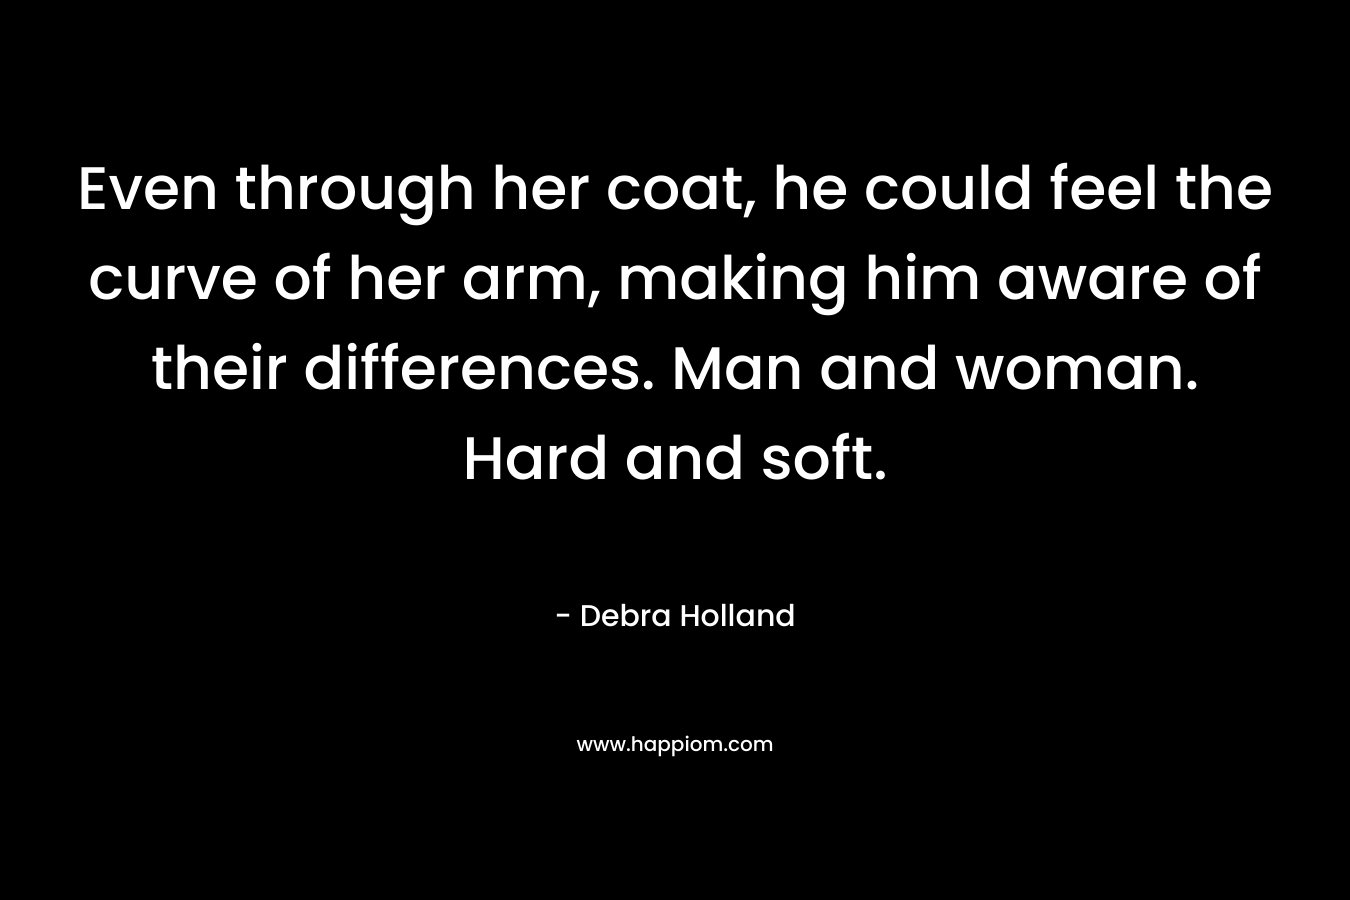 Even through her coat, he could feel the curve of her arm, making him aware of their differences. Man and woman. Hard and soft. – Debra Holland